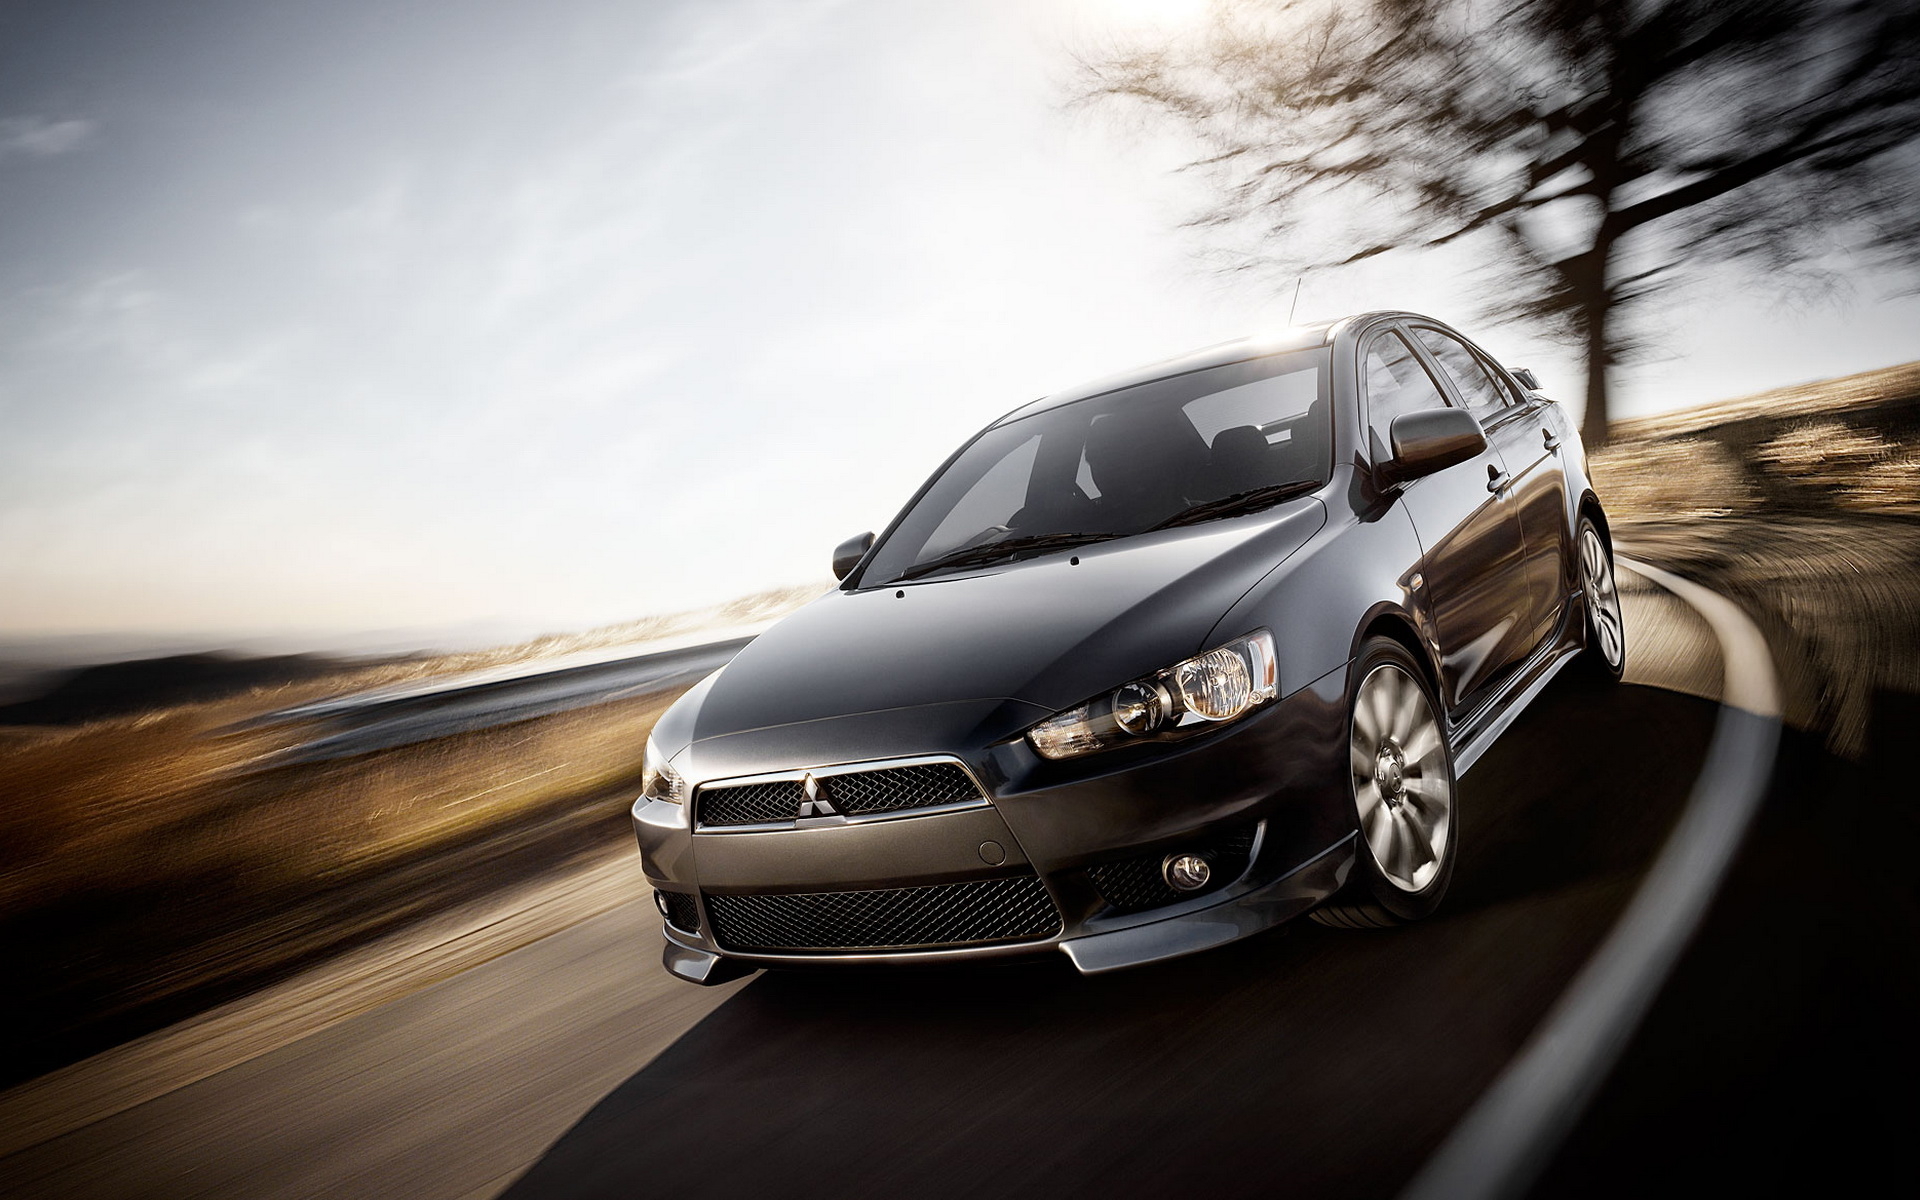 mitsubishi lancer | In HD Wallpaper Home Design and Cars HD ...